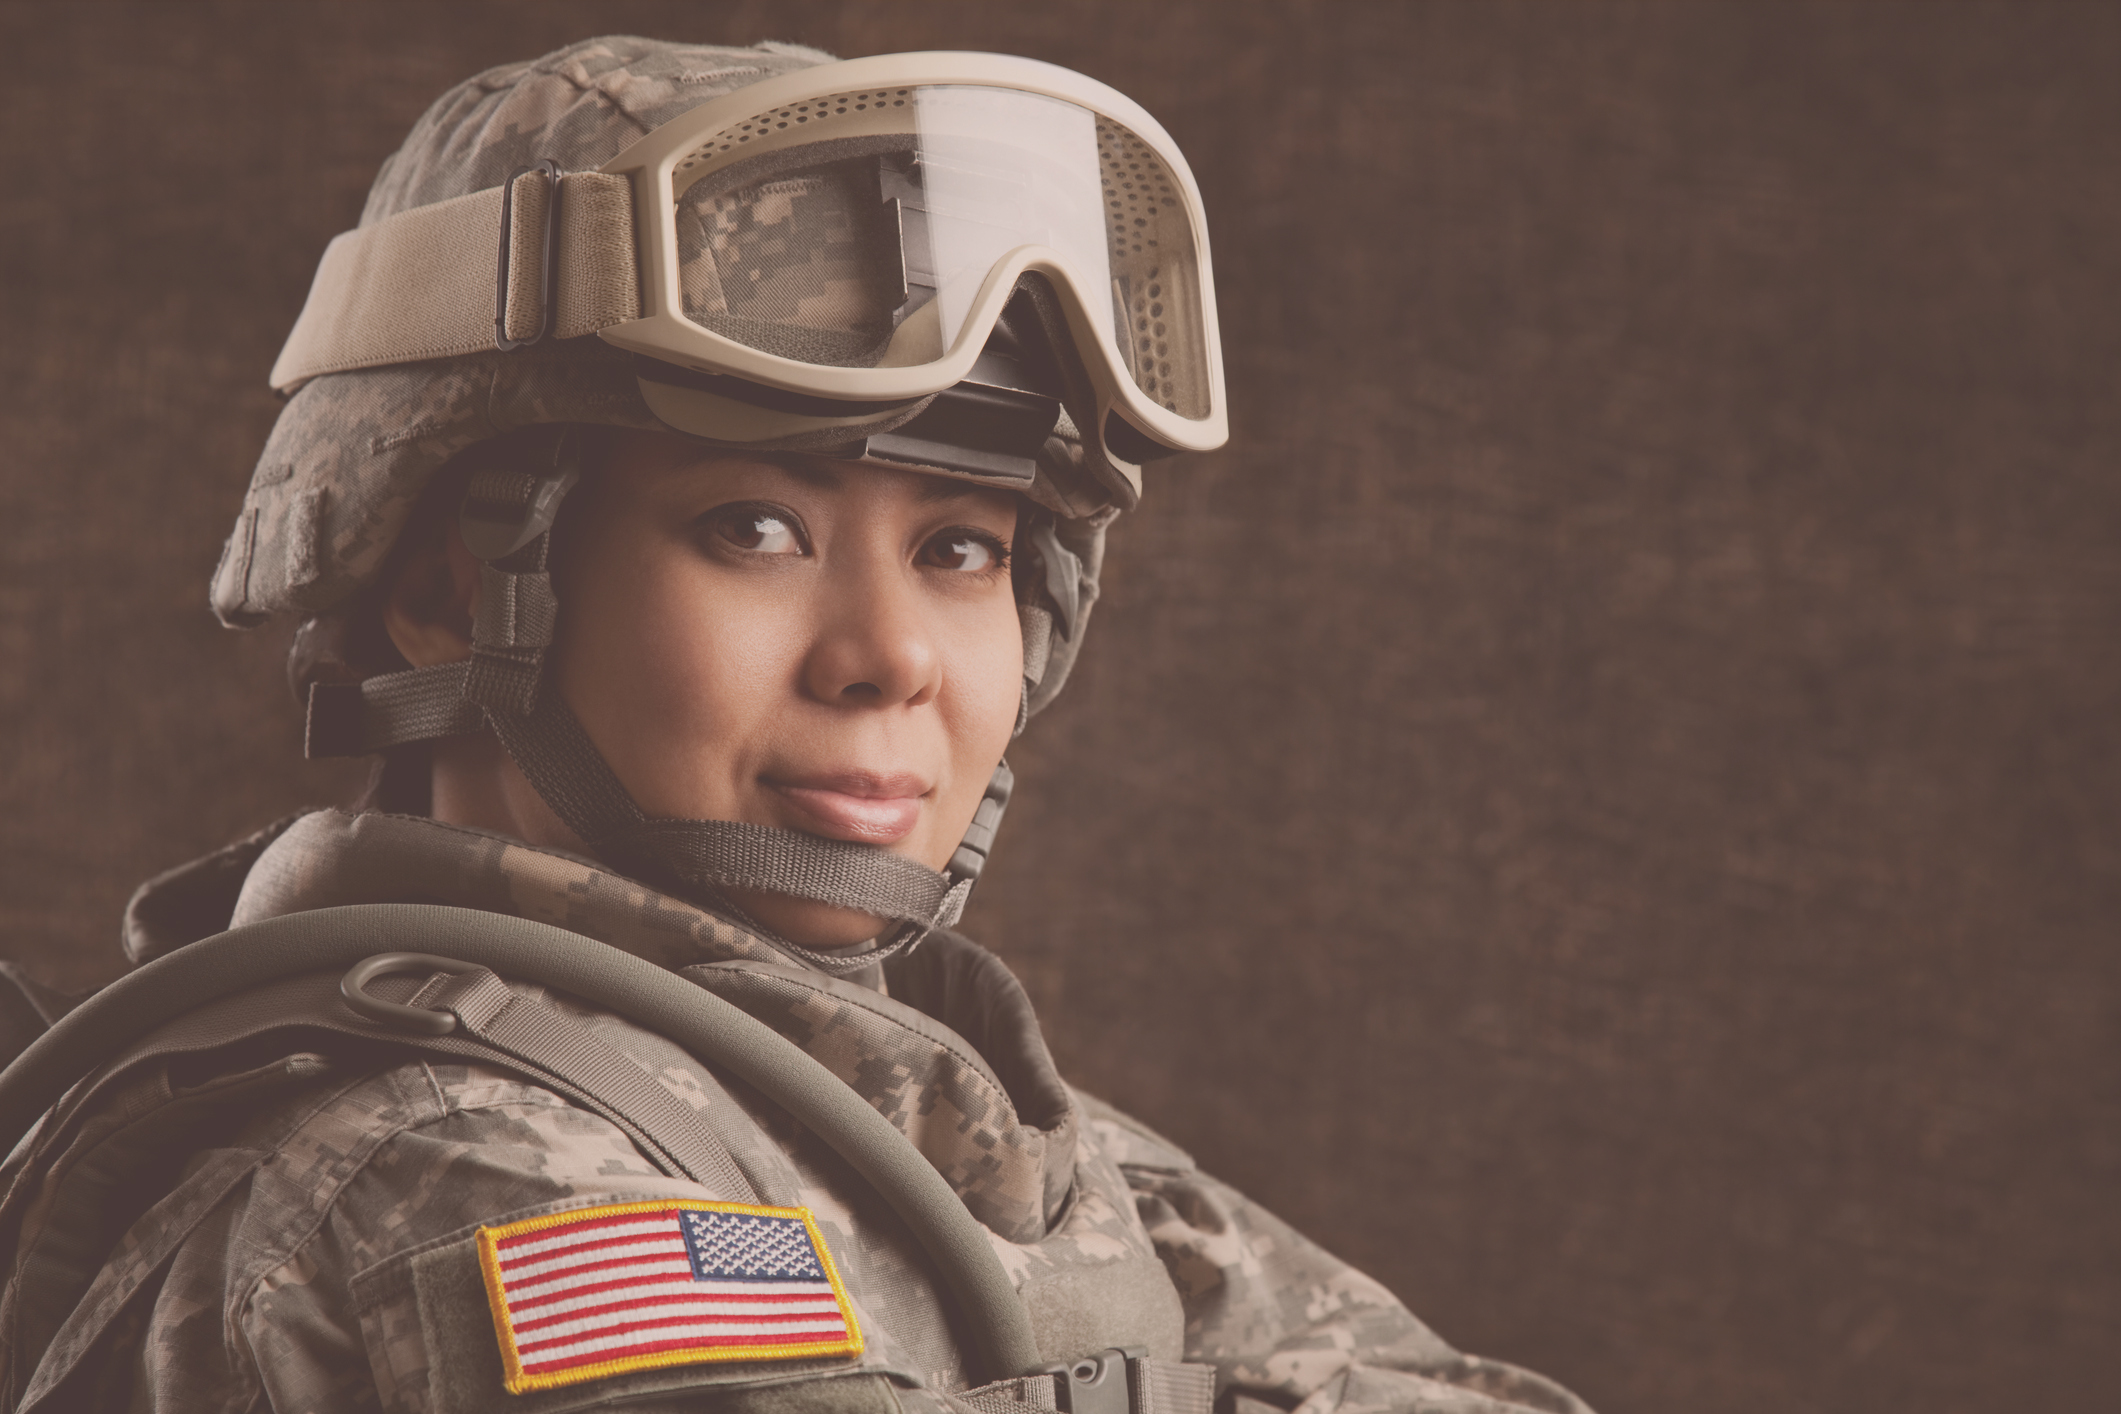 A woman veteran in military camo fatigues looks directly at the camera.